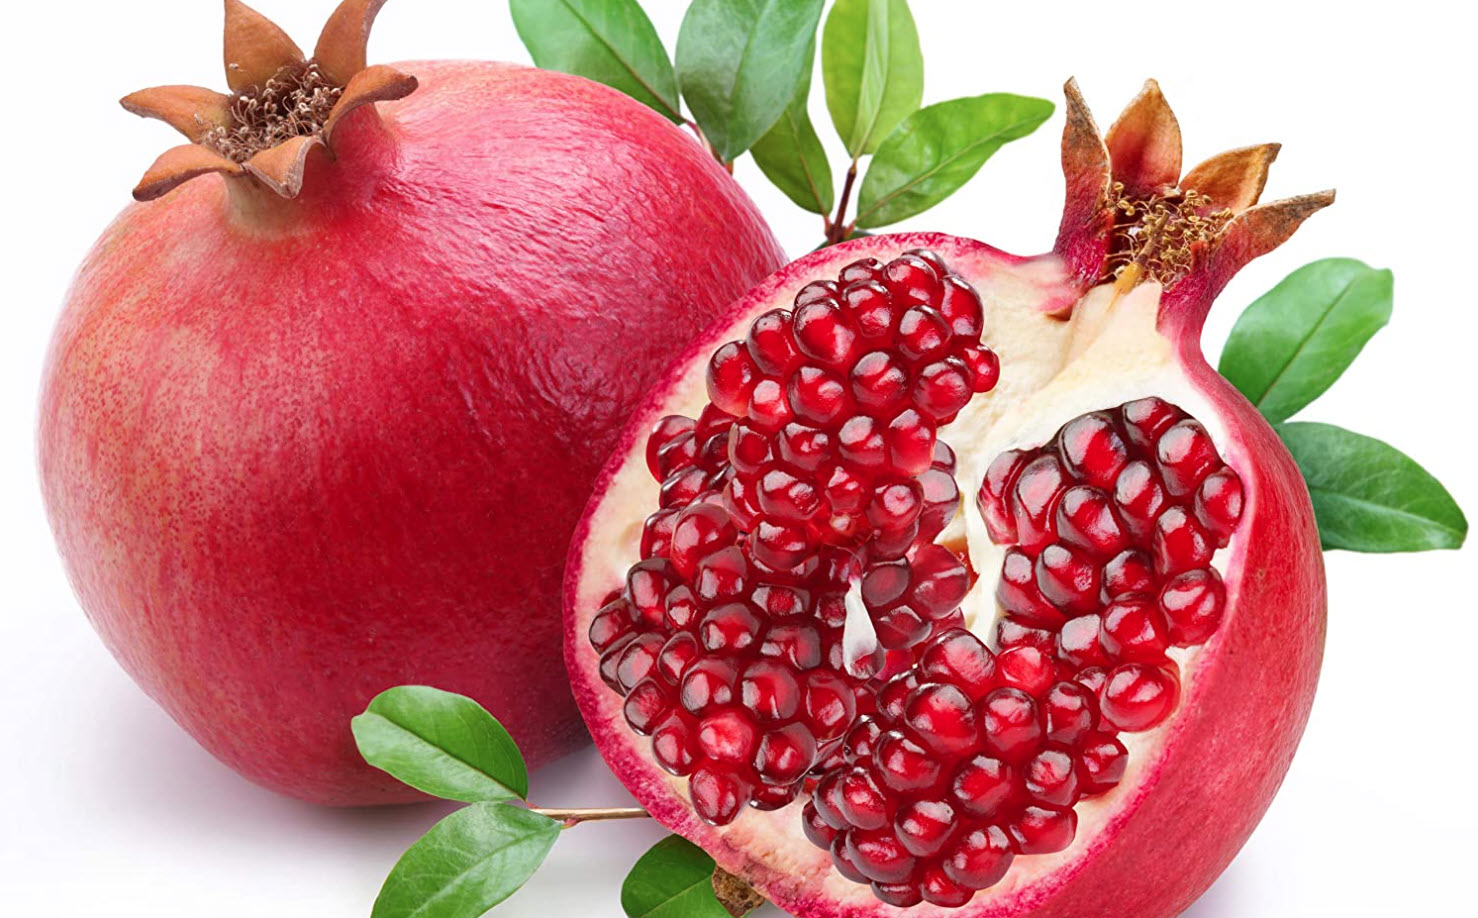 What is pomegranate good for